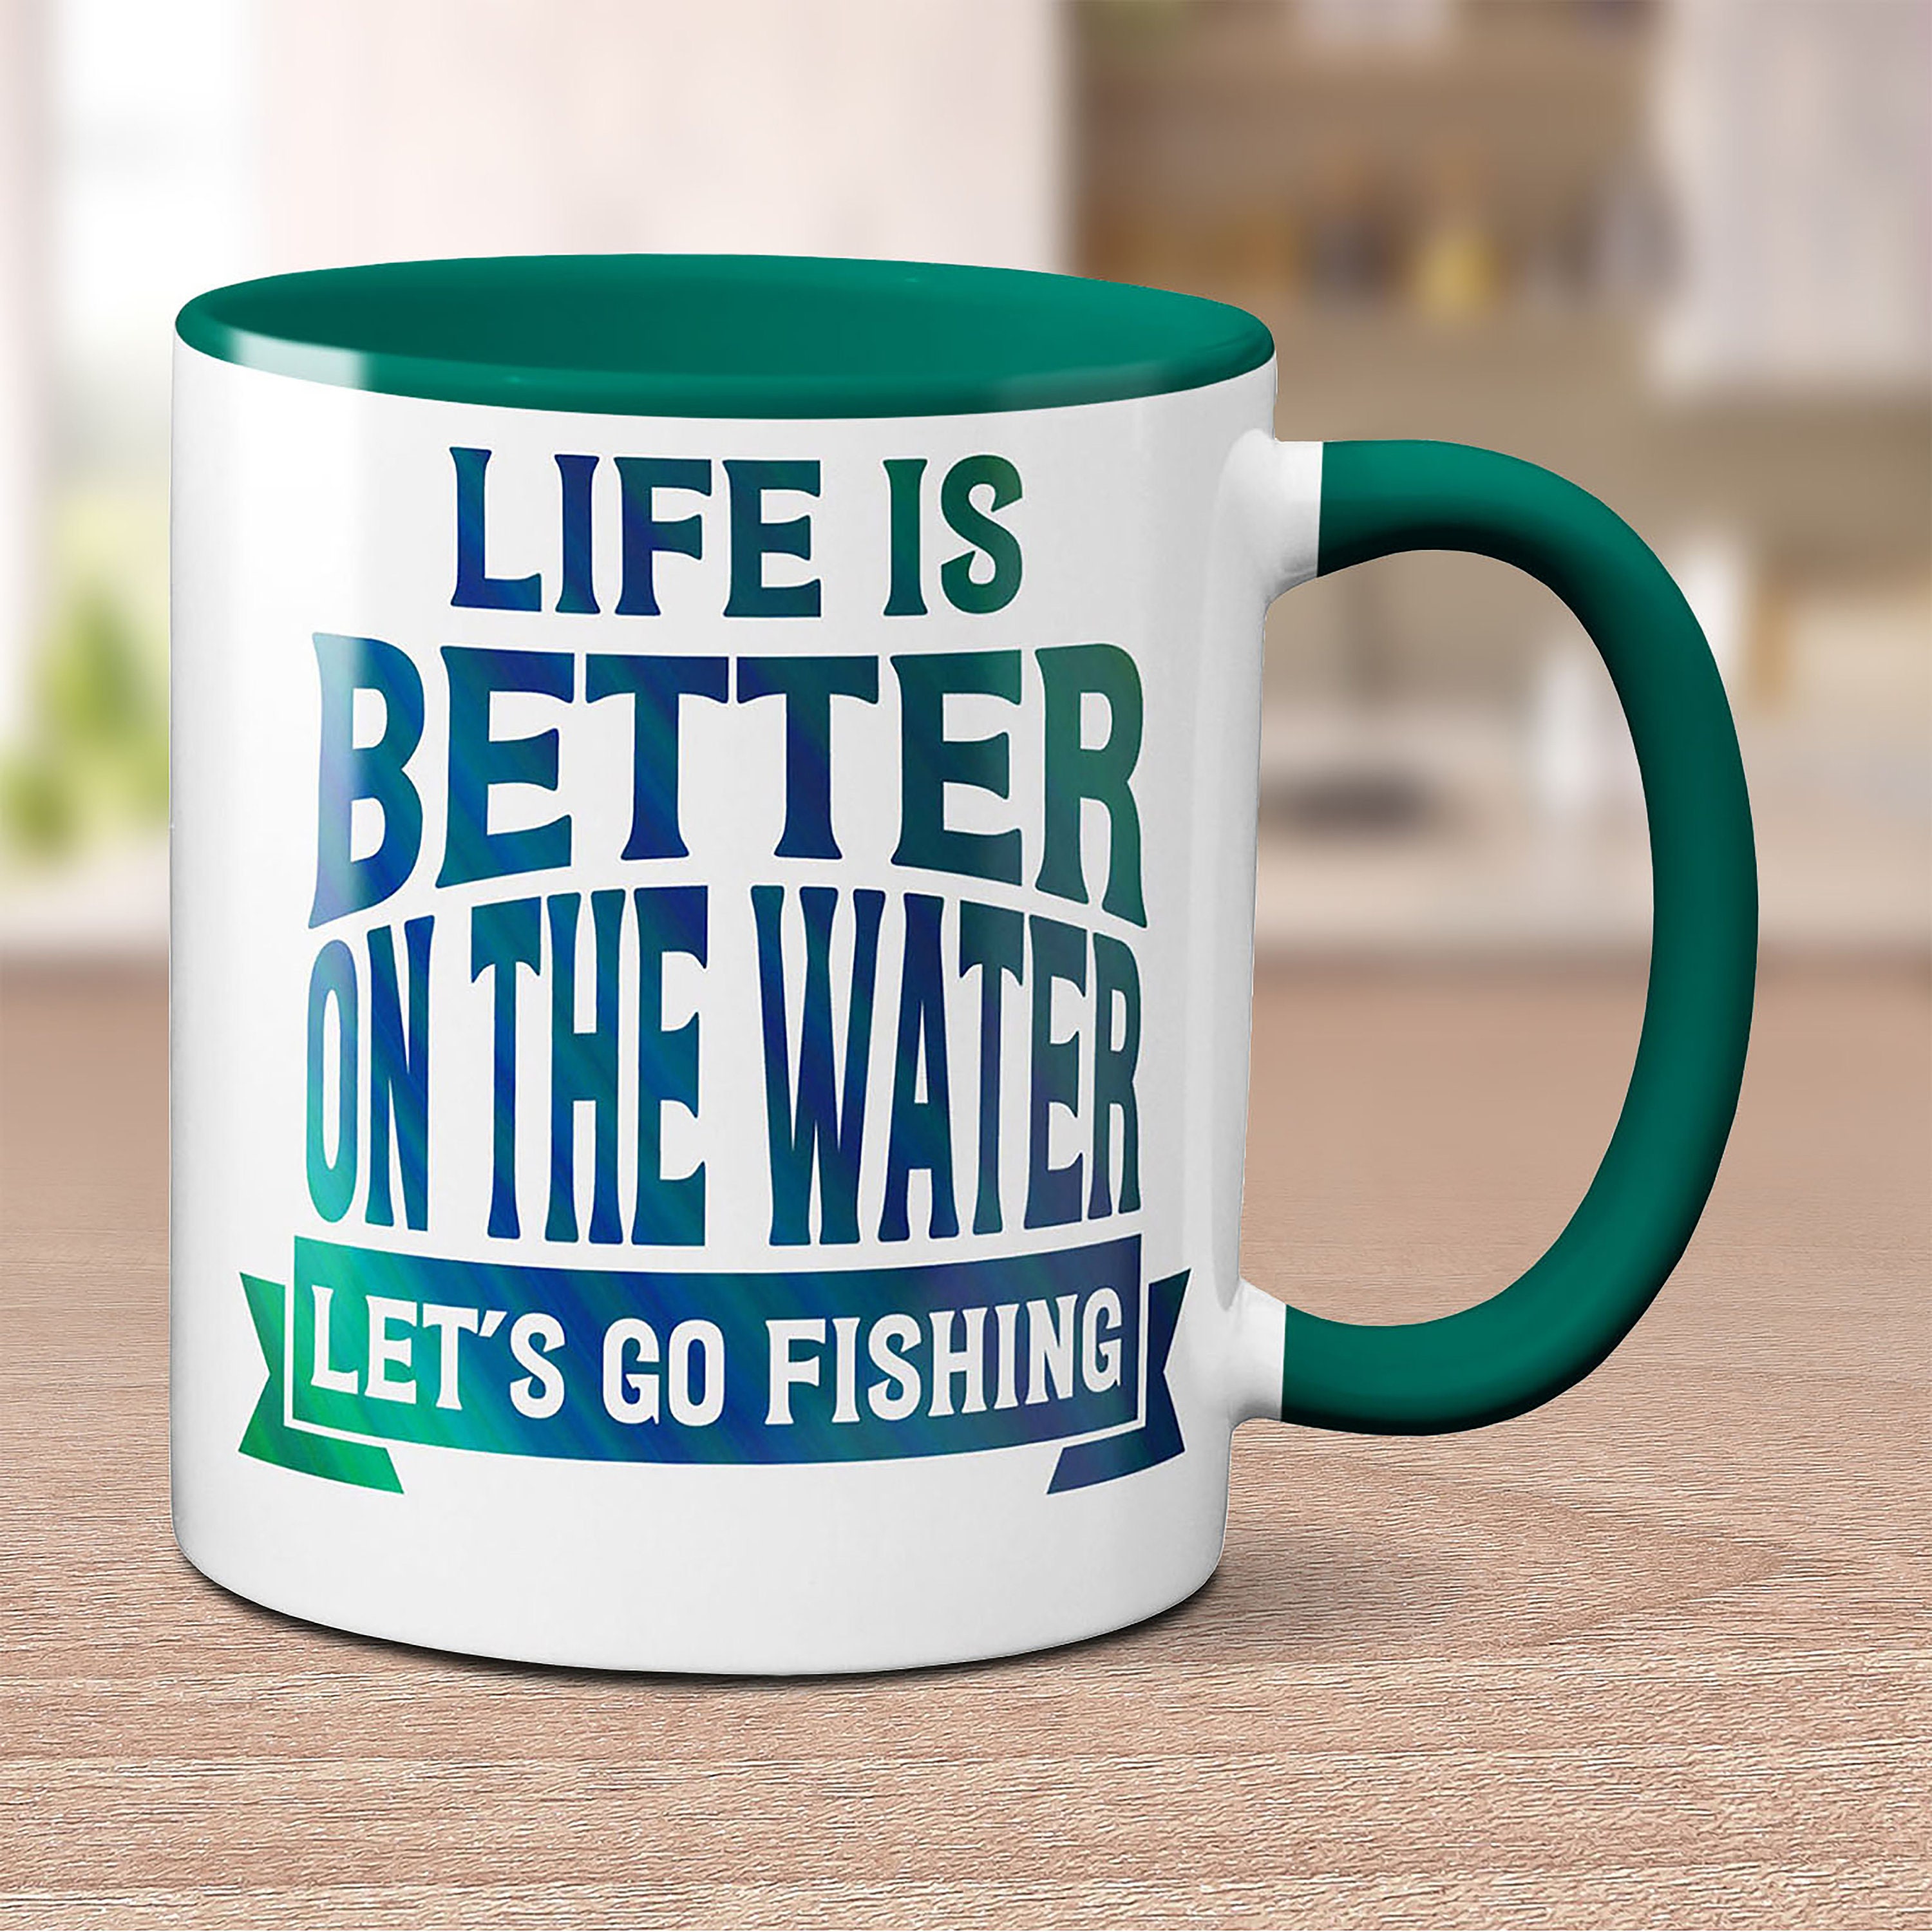 Let's Go Fishing Mug Personalized Fishing Gifts for the Fishing